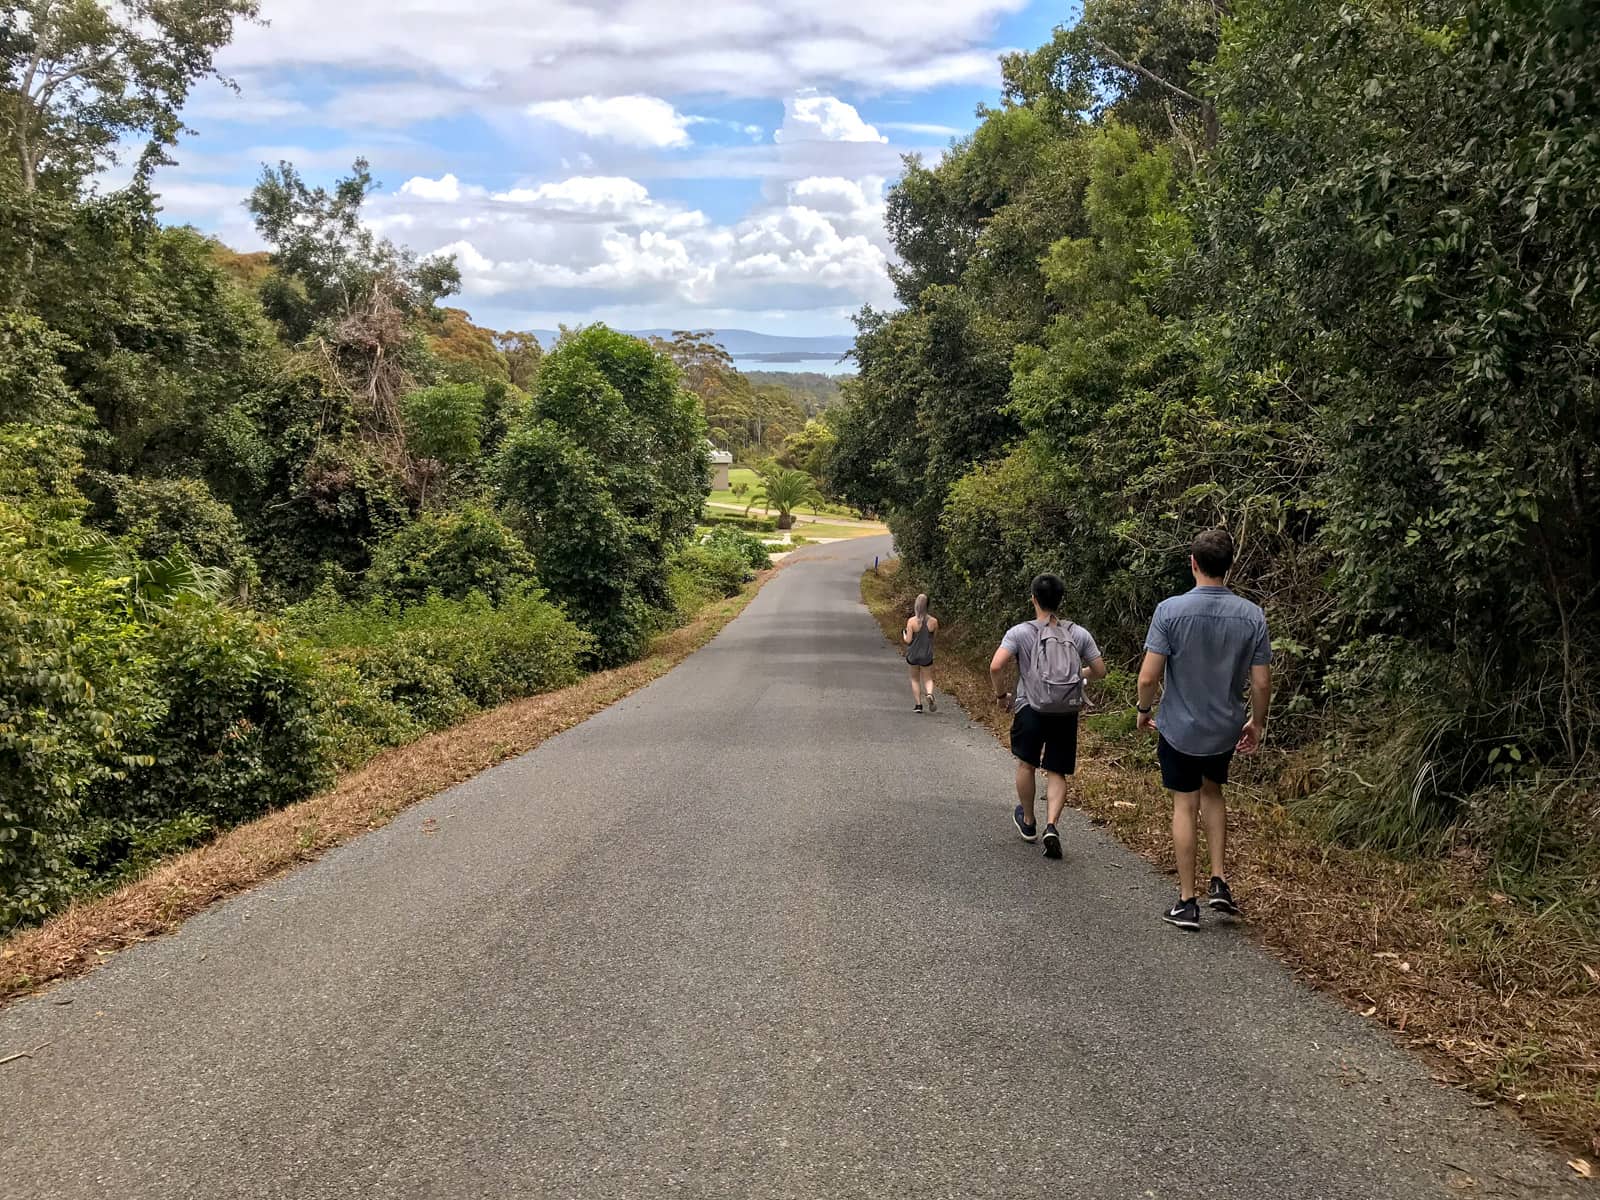 A road with three people walking down the right hand side. There are lush green trees and bushes lining the sides of the road. The road is on a slight decline. The sky is blue with many clouds.